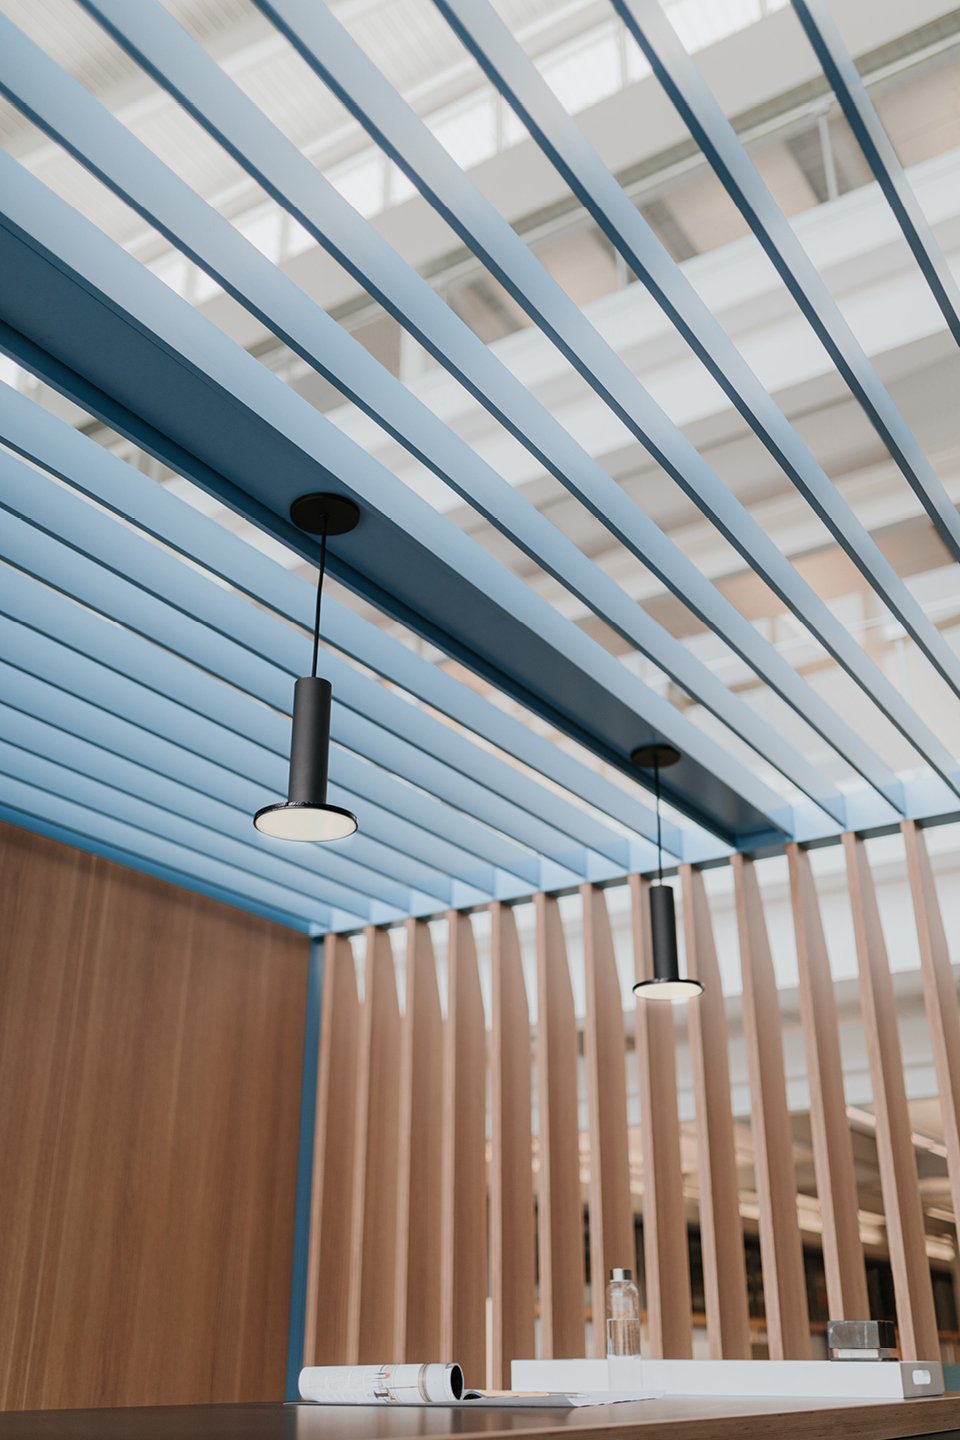 Haworth Pergola Workspace with veneer slits and blue beams on top with overhead lights hanging down over black table in office space